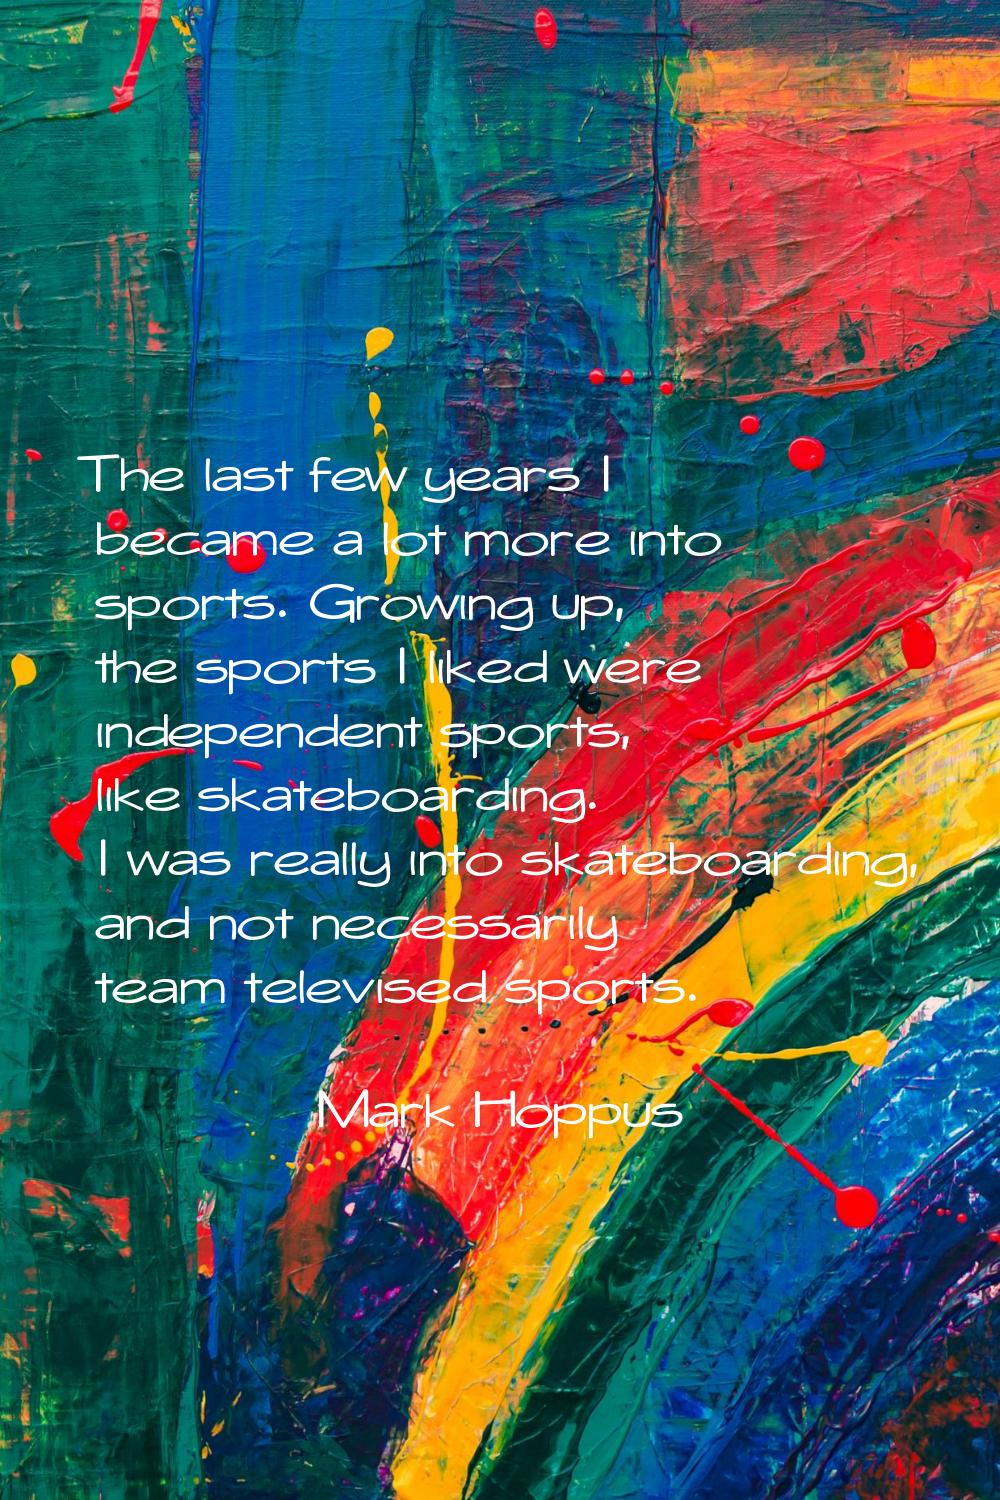 The last few years I became a lot more into sports. Growing up, the sports I liked were independent